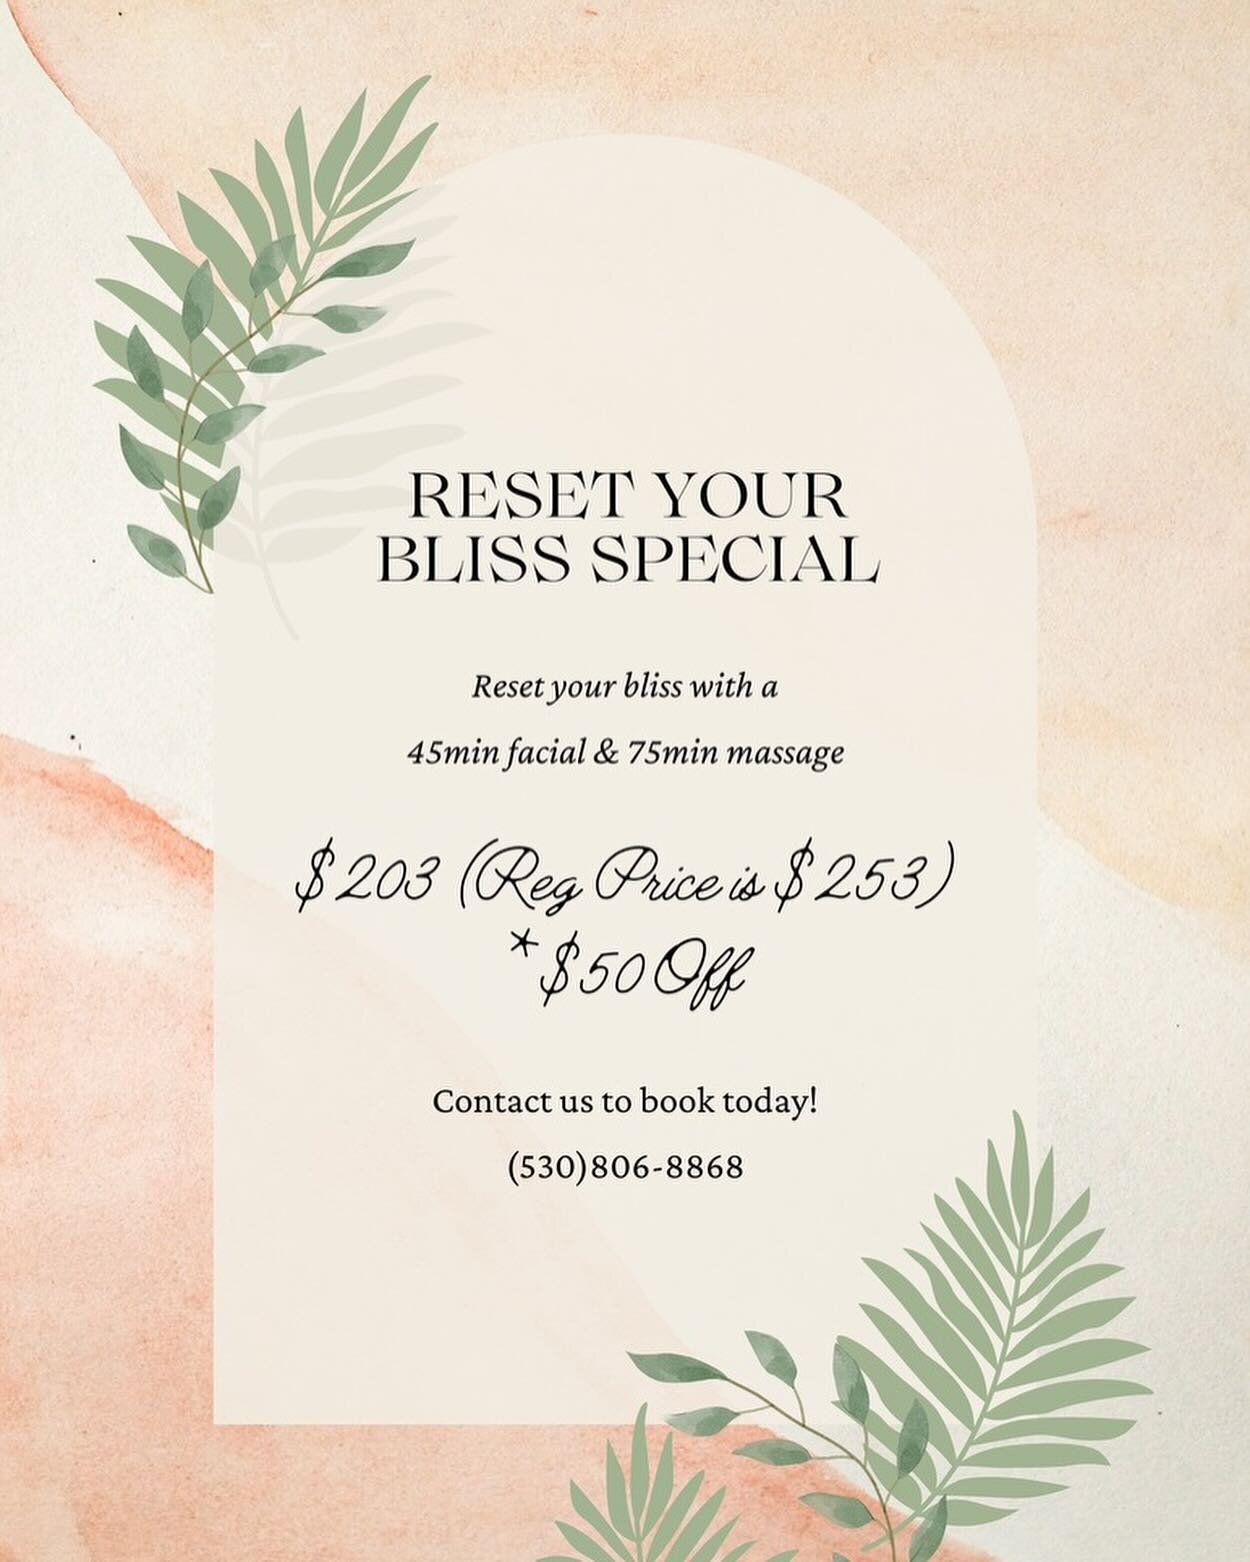 Special weekend Sale! ✨

Book today to embrace your relaxation with either of the following Facial/Massage Combos

Reset your bliss🌹
45min facial/75min massage 
$203 (regular price $253) $50 off!

Rest &amp; Revive🌹
60min facial / 90min massage 
$2